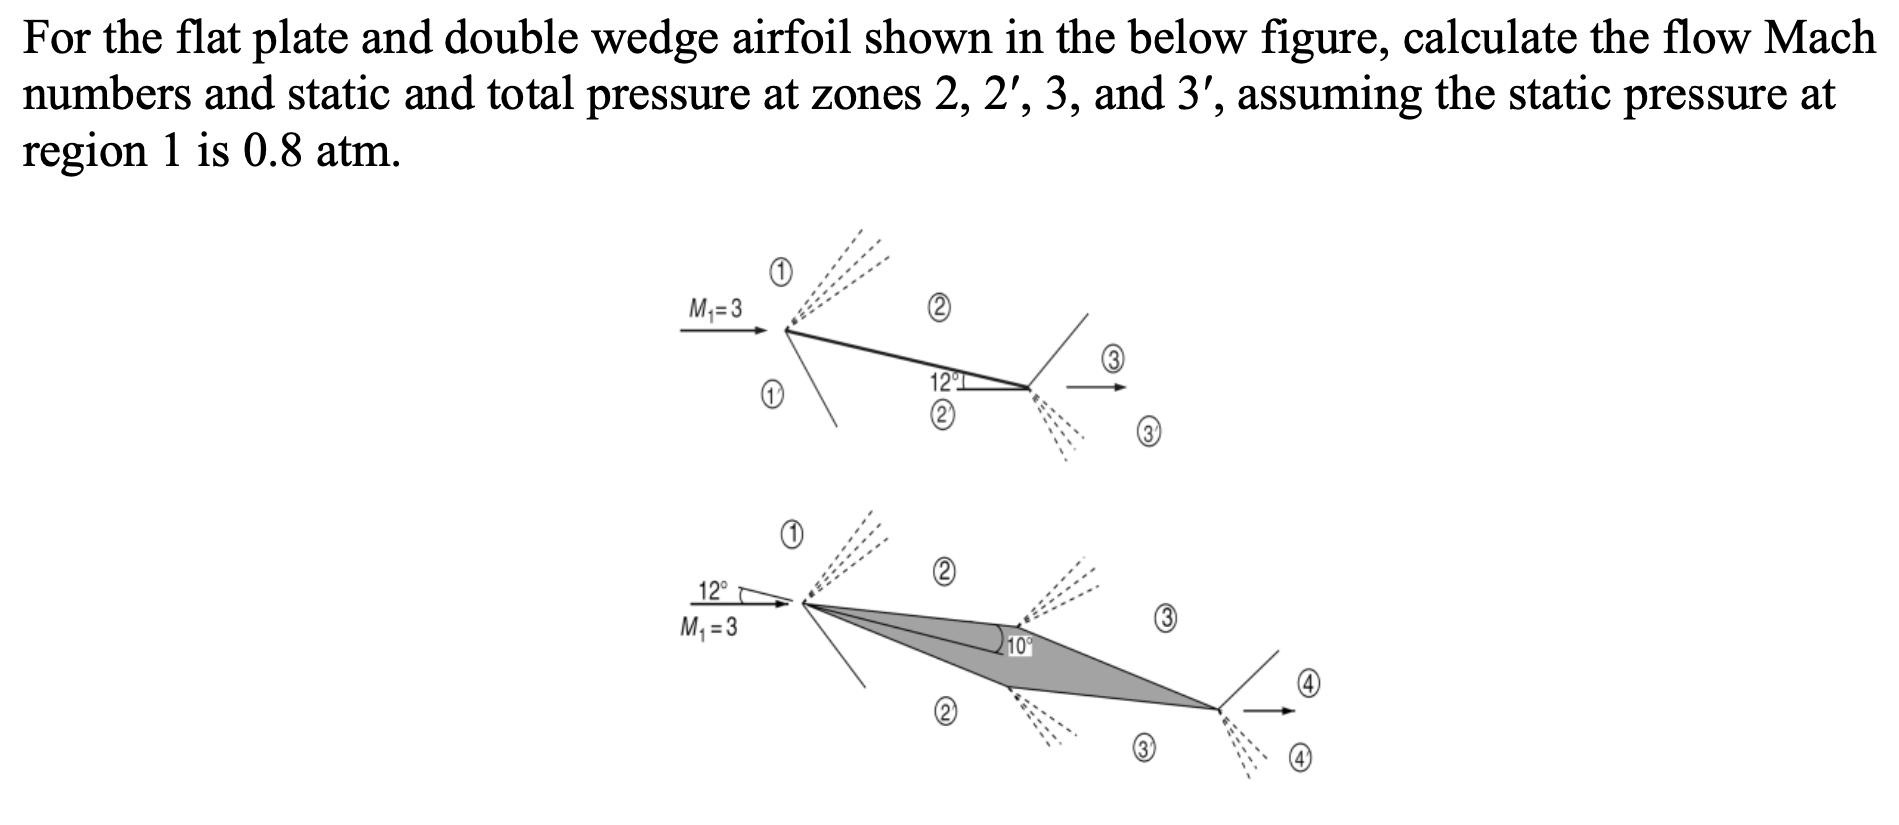 For the flat plate and double wedge airfoil shown in the below figure, calculate the flow Mach numbers and